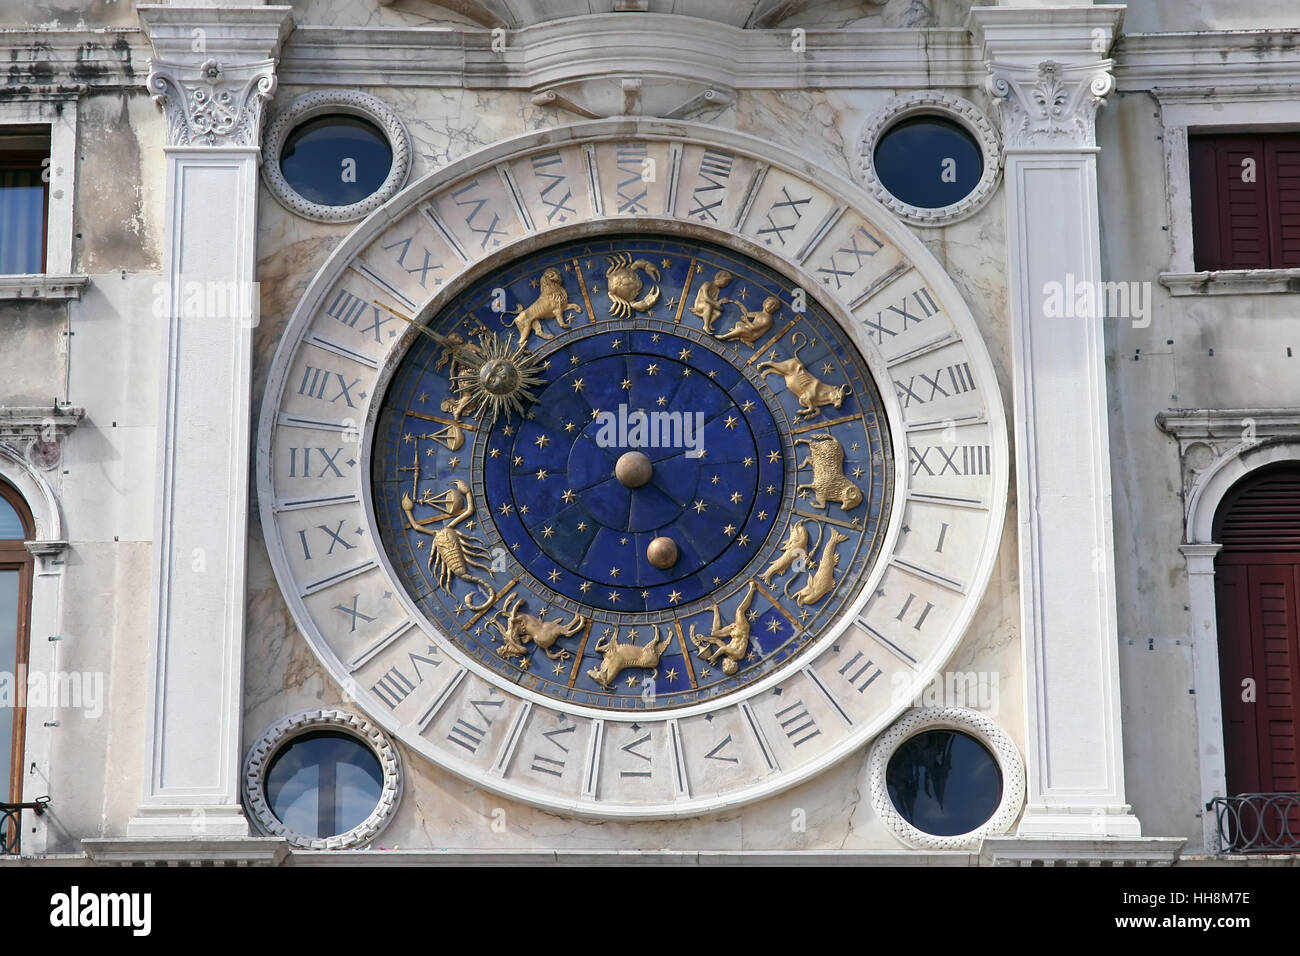 Ancient astrology clock. Ancient astronomy clock. Stock Photo